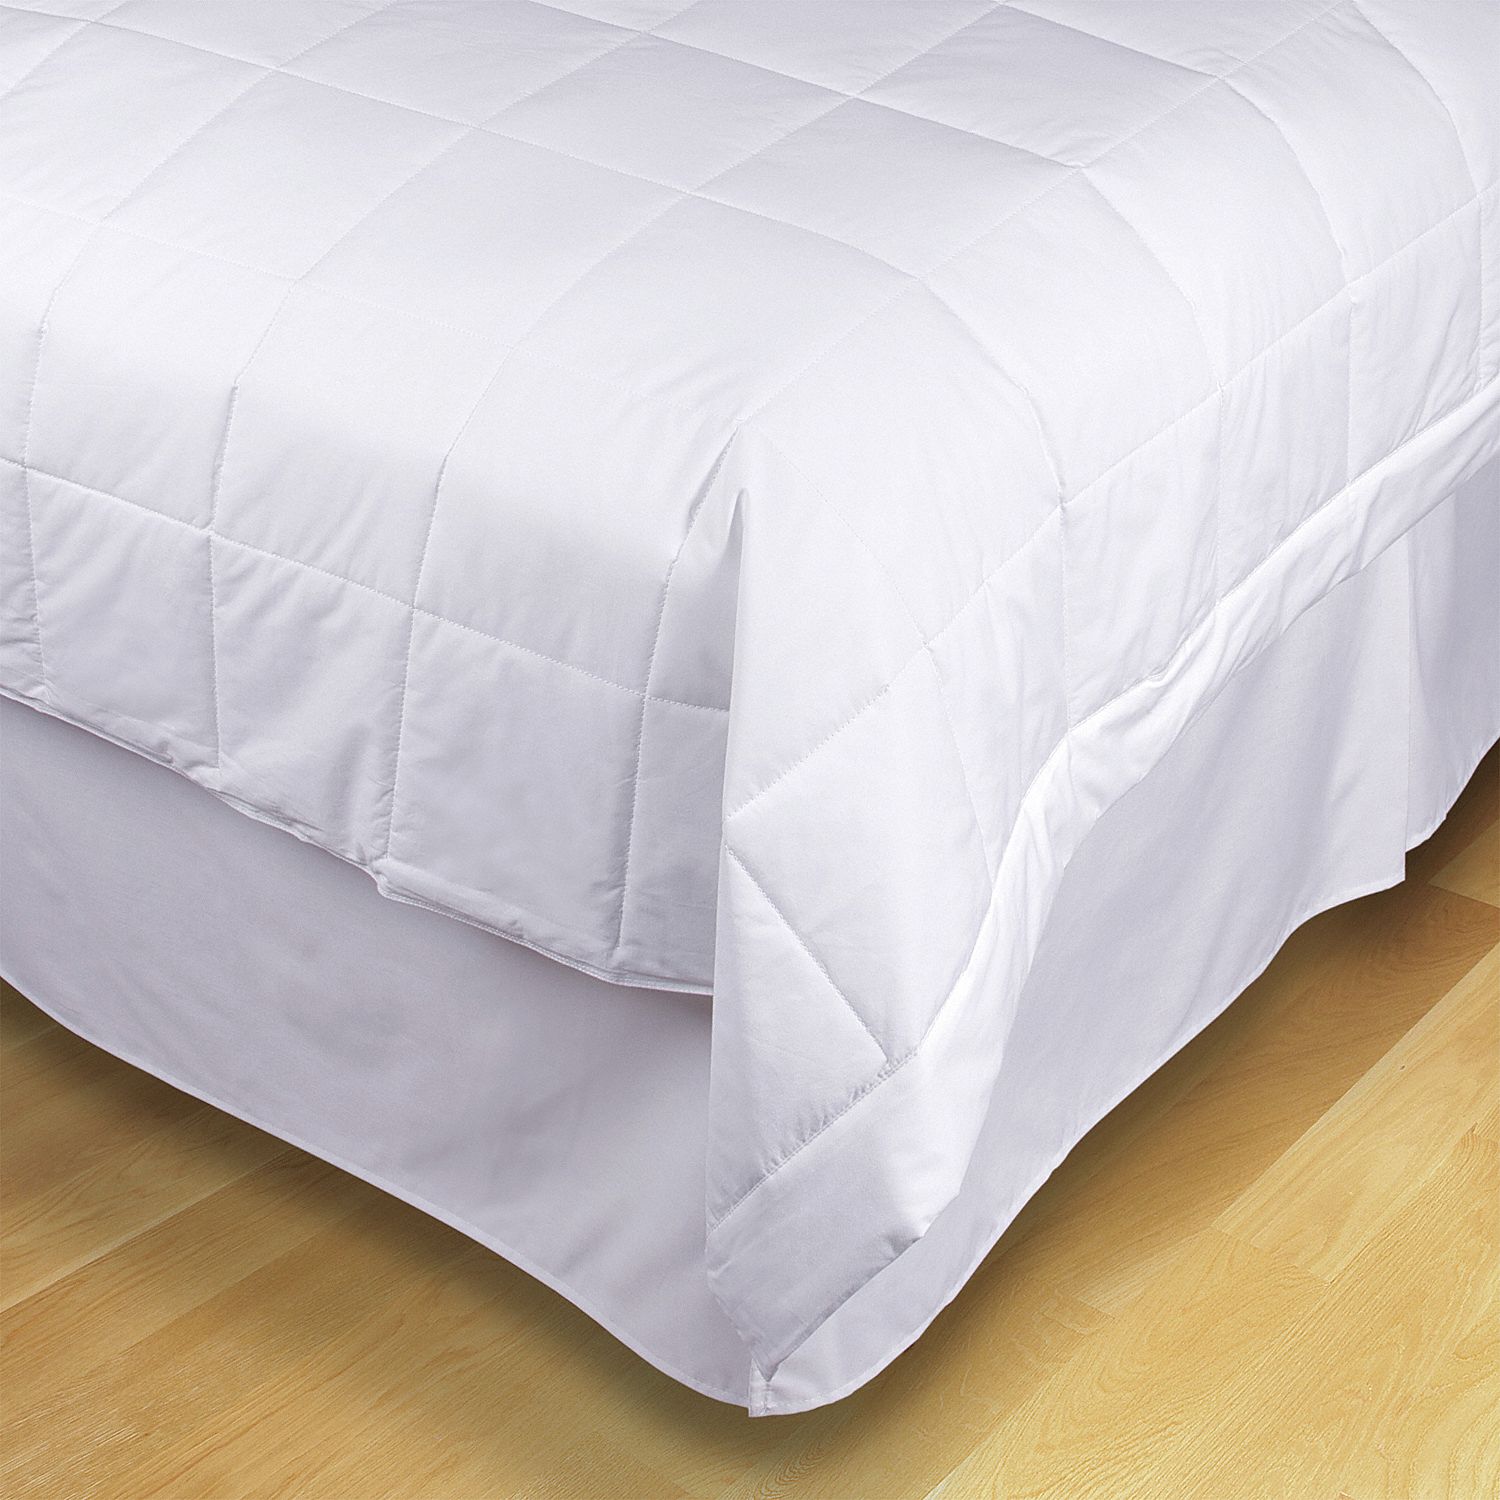 Filled Blanket: King, White, 108 in Wd, 90 in Lg, Reuse-Recycled Cotton Cover/Polyfill, 2 PK